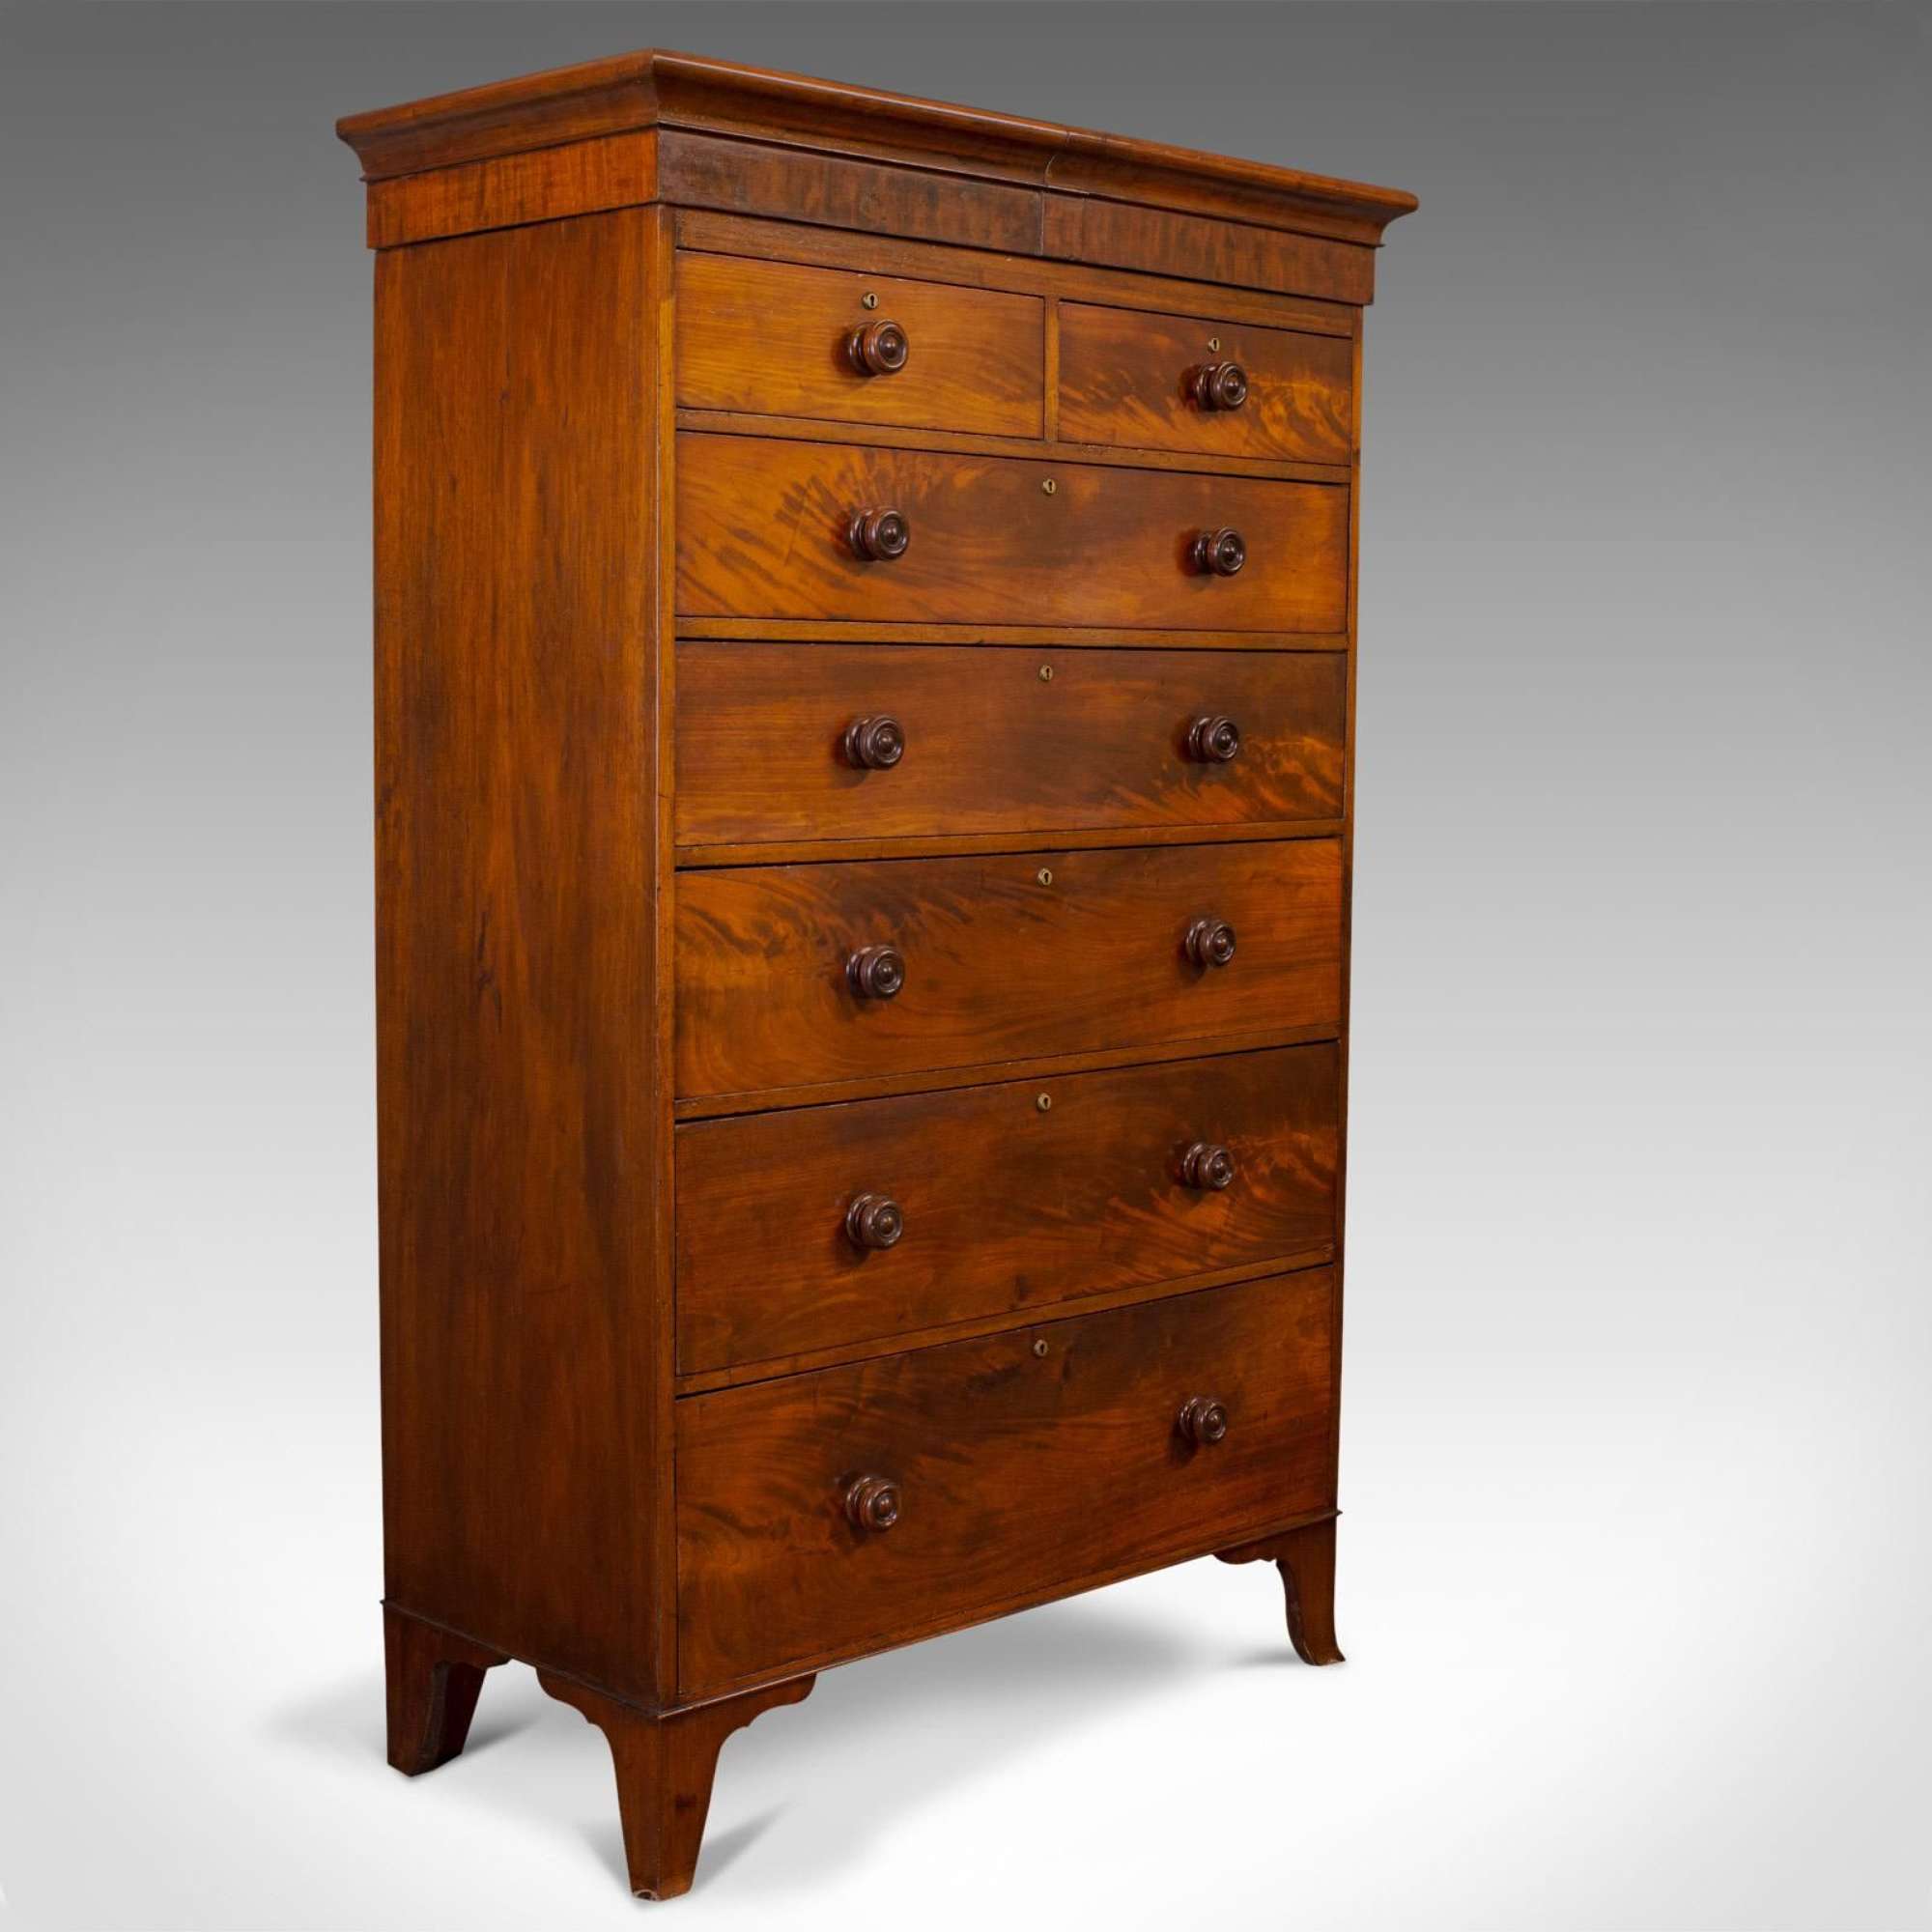 Antique Tallboy, English, Flame Mahogany, Tall Chest Of Drawers, Victorian, 1850